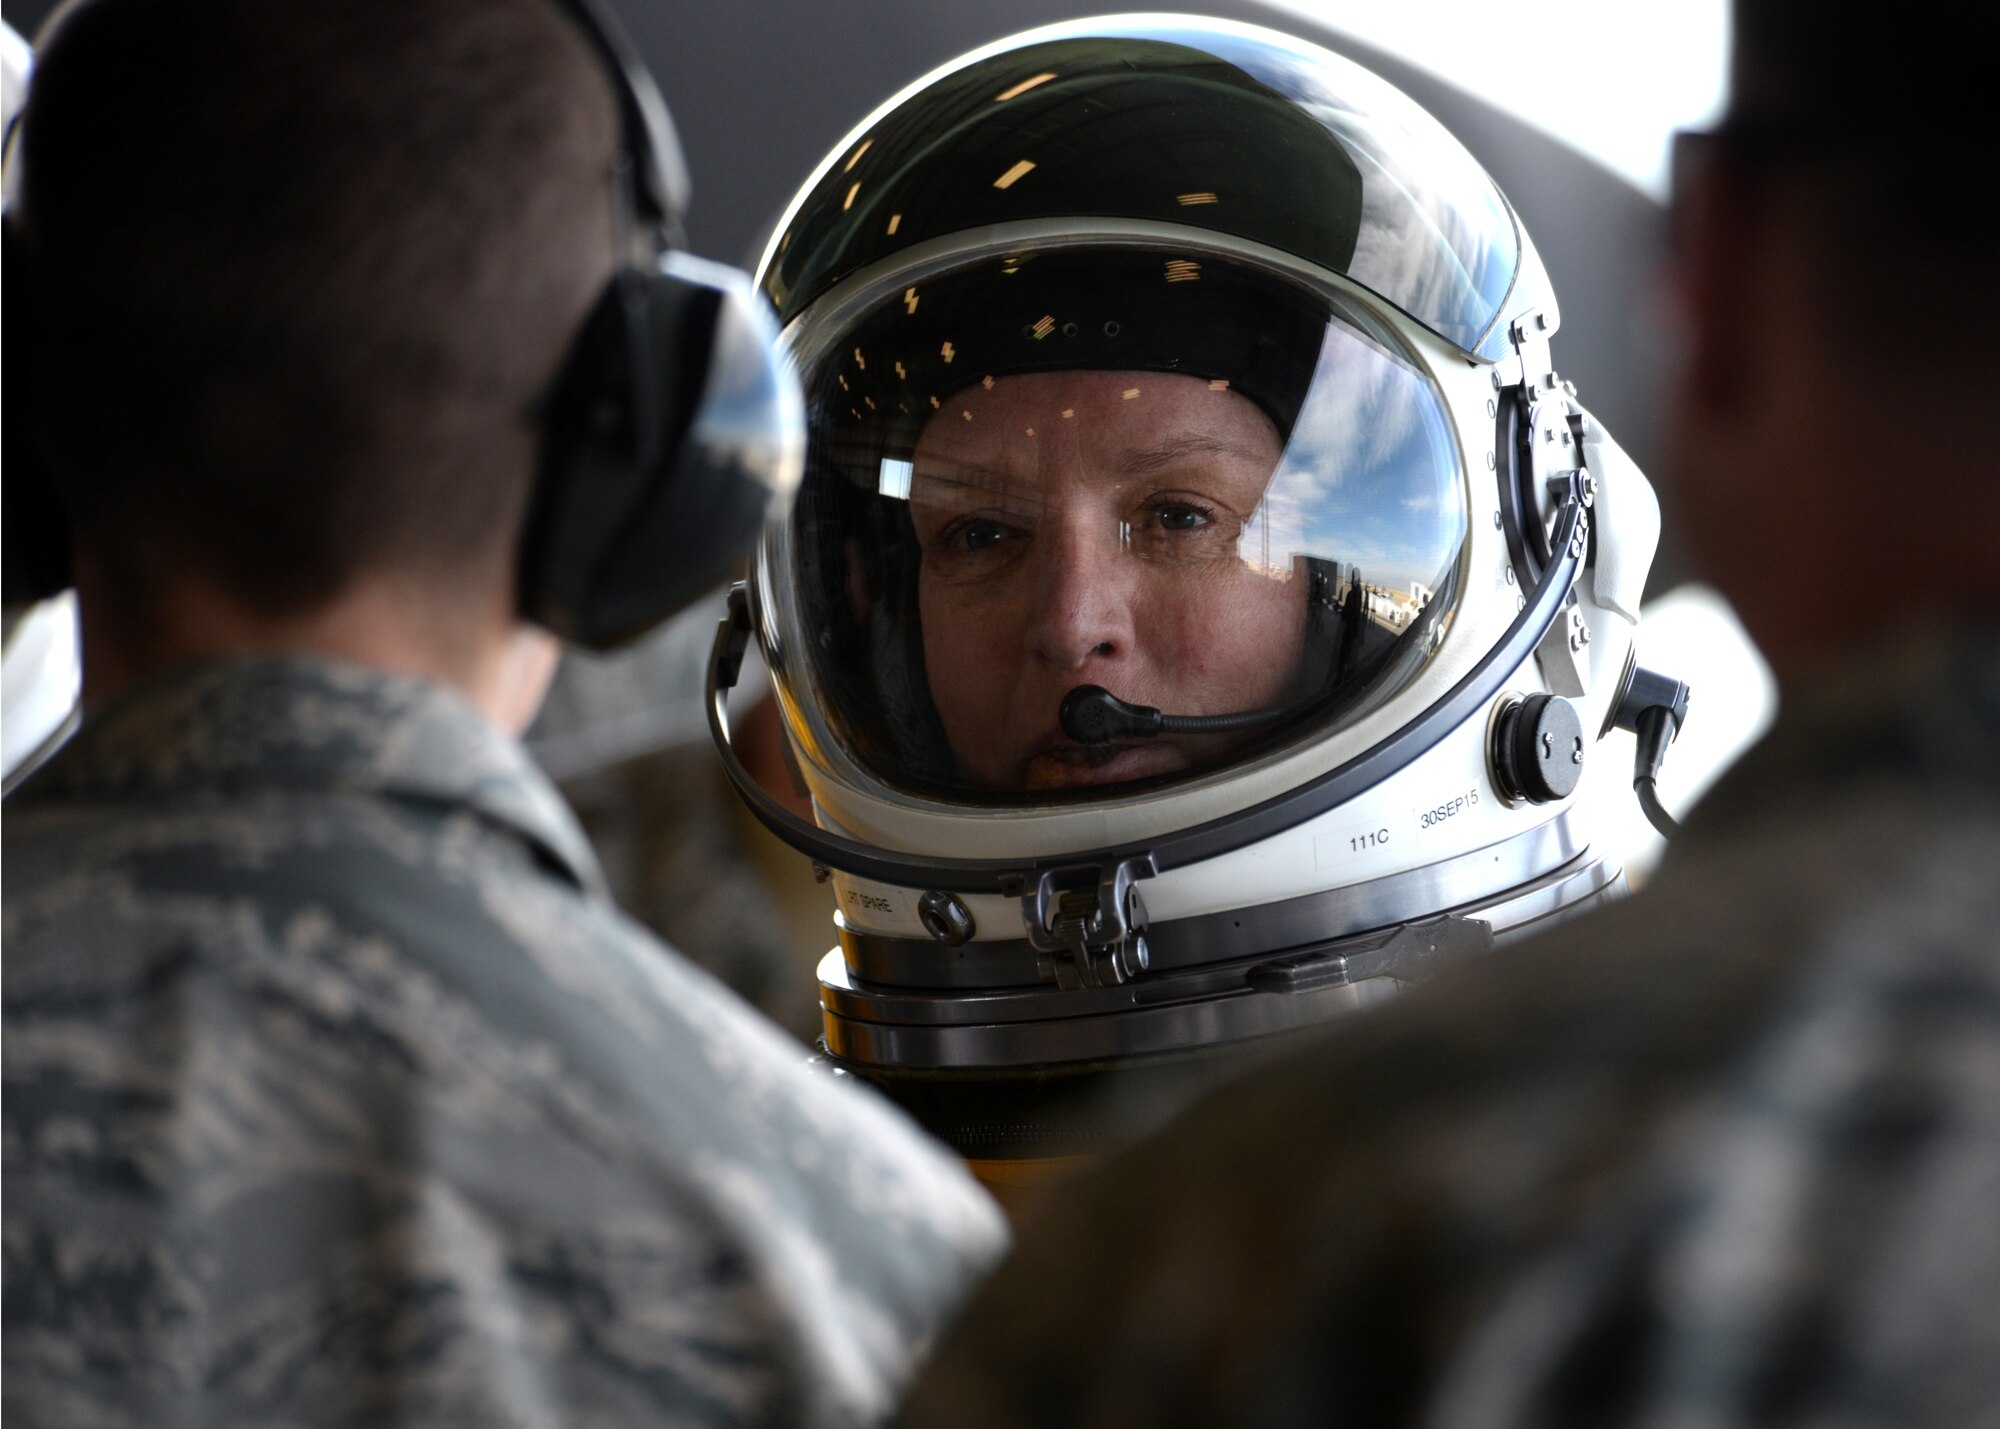 Secretary of the Air Force Deborah Lee James shakes hands with maintenance Airmen from the 9th Aircraft Maintenance Squadron before flying in a U-2 Dragon Lady at Beale Air Force Base, California, Aug. 11, 2015.  The specialized pressure suit allows U-2 pilots to safely fly at altitudes reaching 70,000 feet. James visited Beale to receive a first-hand perspective of high-altitude intelligence, surveillance and reconnaissance from collection to dissemination. (U.S. Air Force photo by Airman 1st Class Ramon A. Adelan)